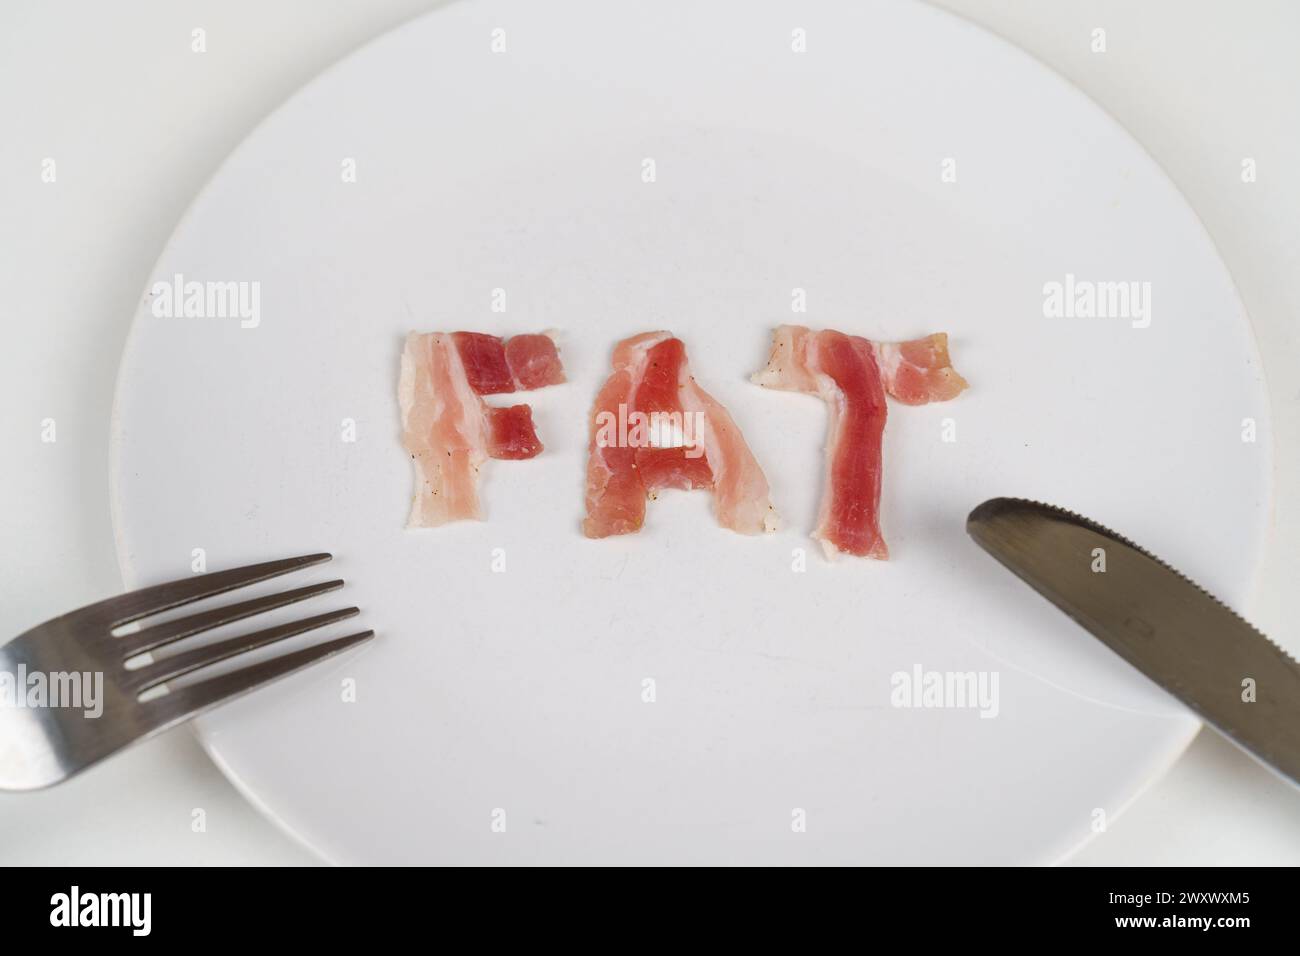 A plate with the word fat on it, accompanied by a fork and knife, symbolizing unhealthy eating habits. Stock Photo